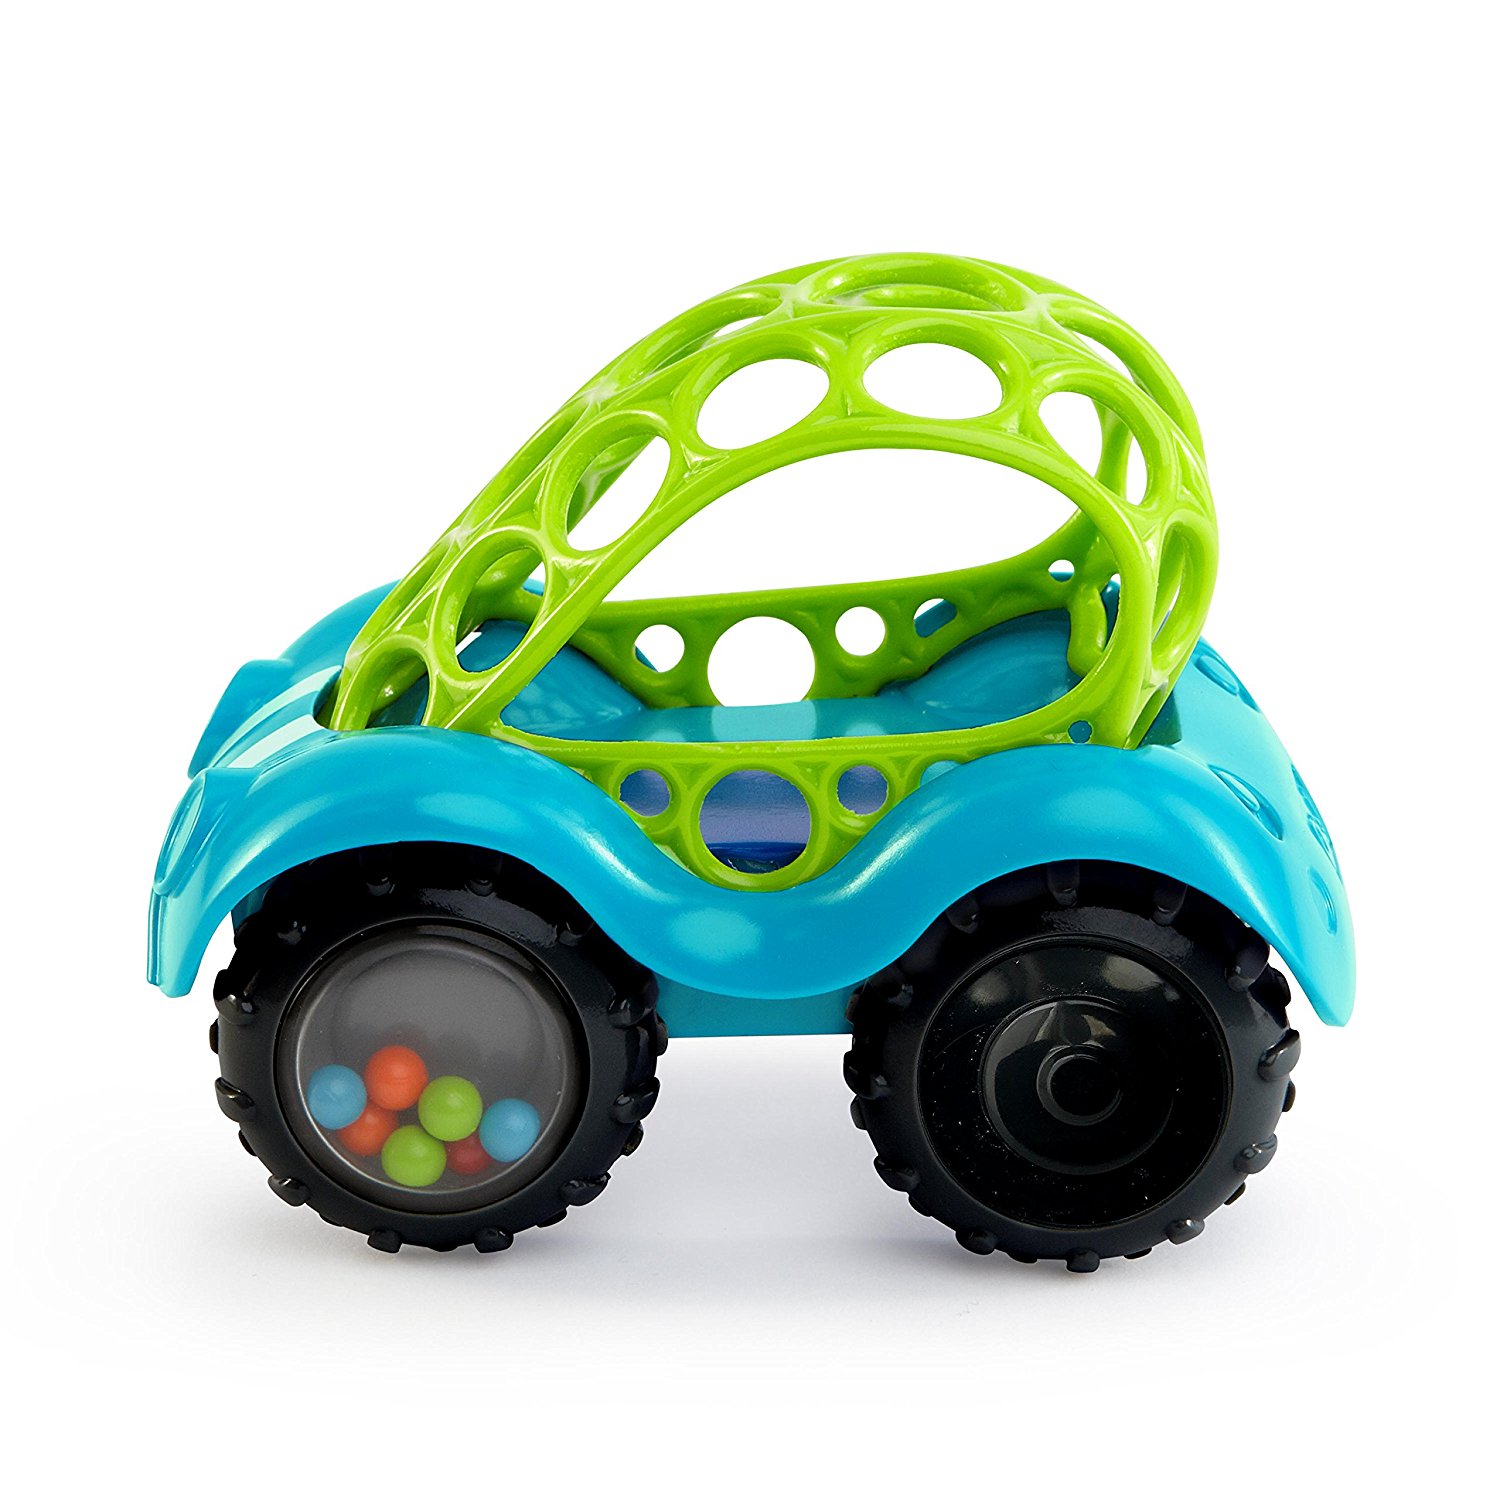 Oball 81510 Rattle and Roll Toy Car, Assorted Colors: Amazon.ca: Baby